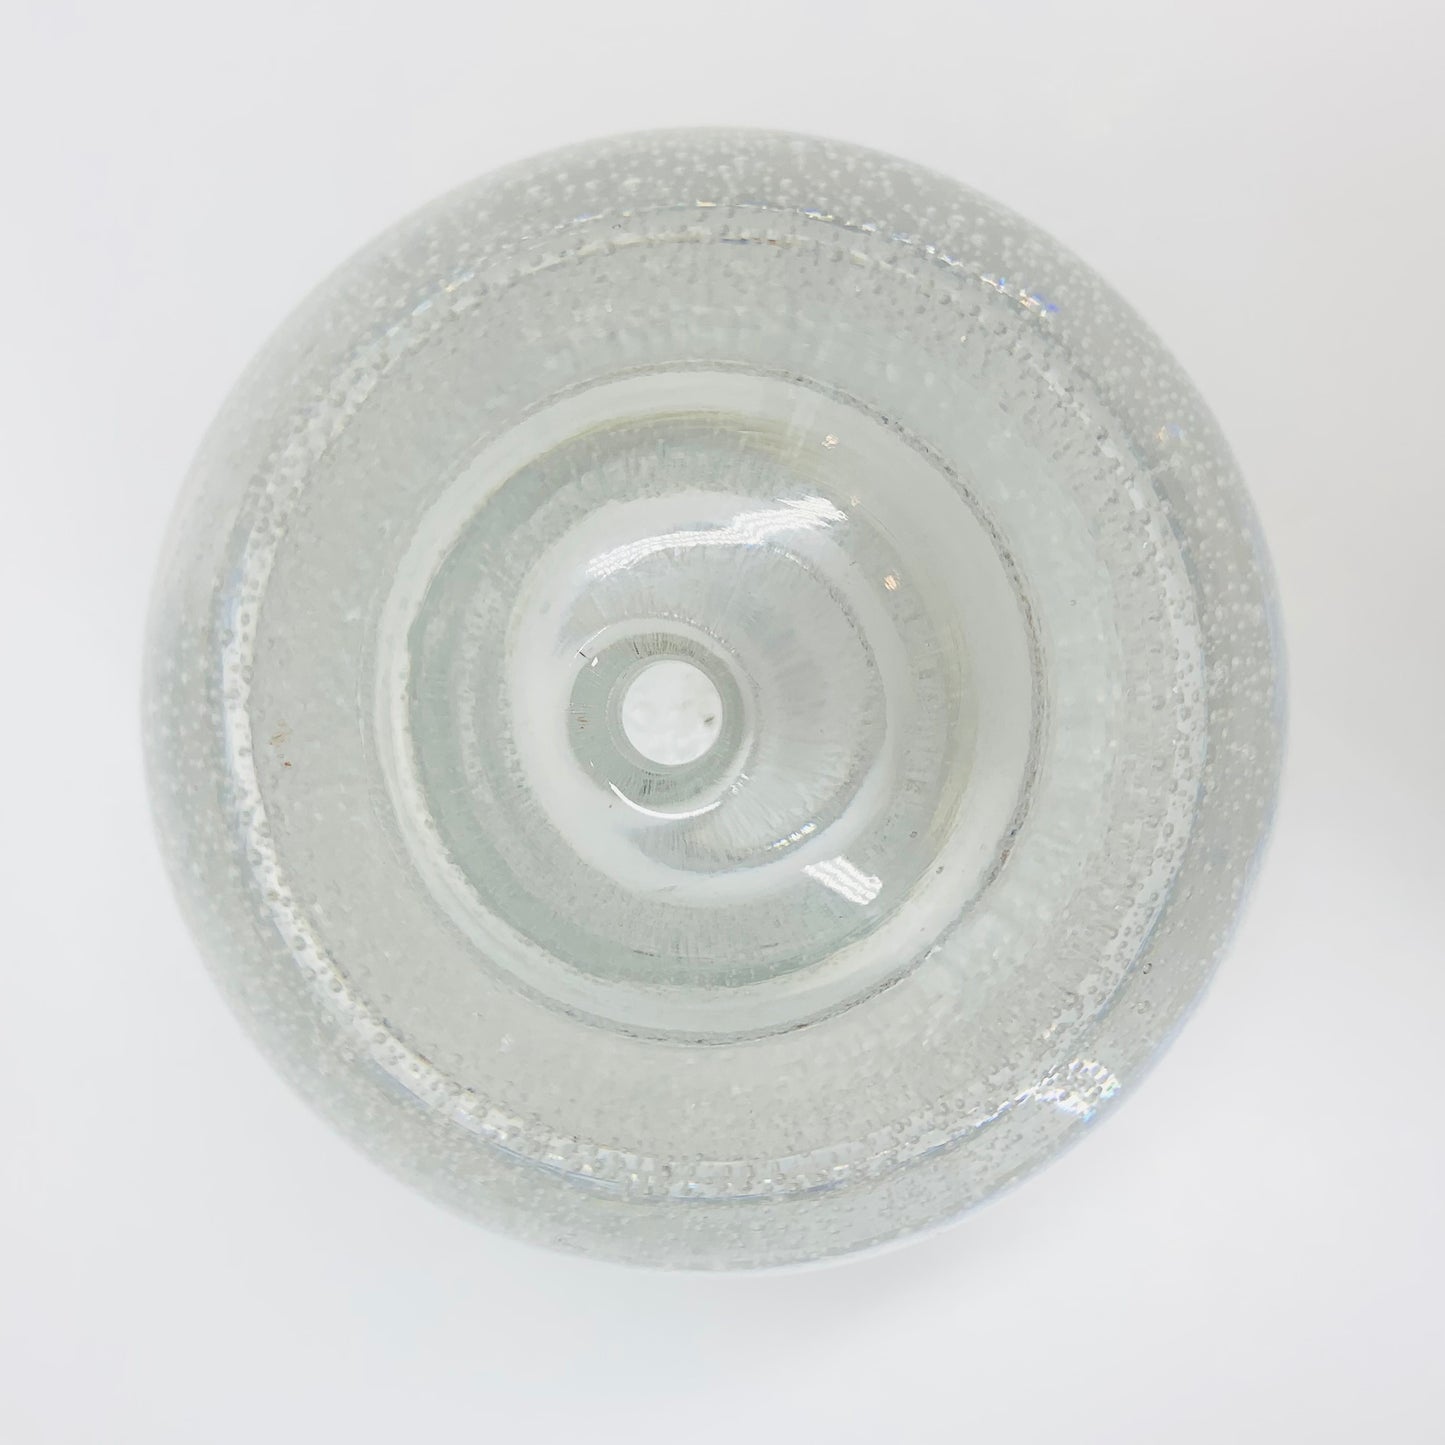 Polish glass orb with controlled bubbles